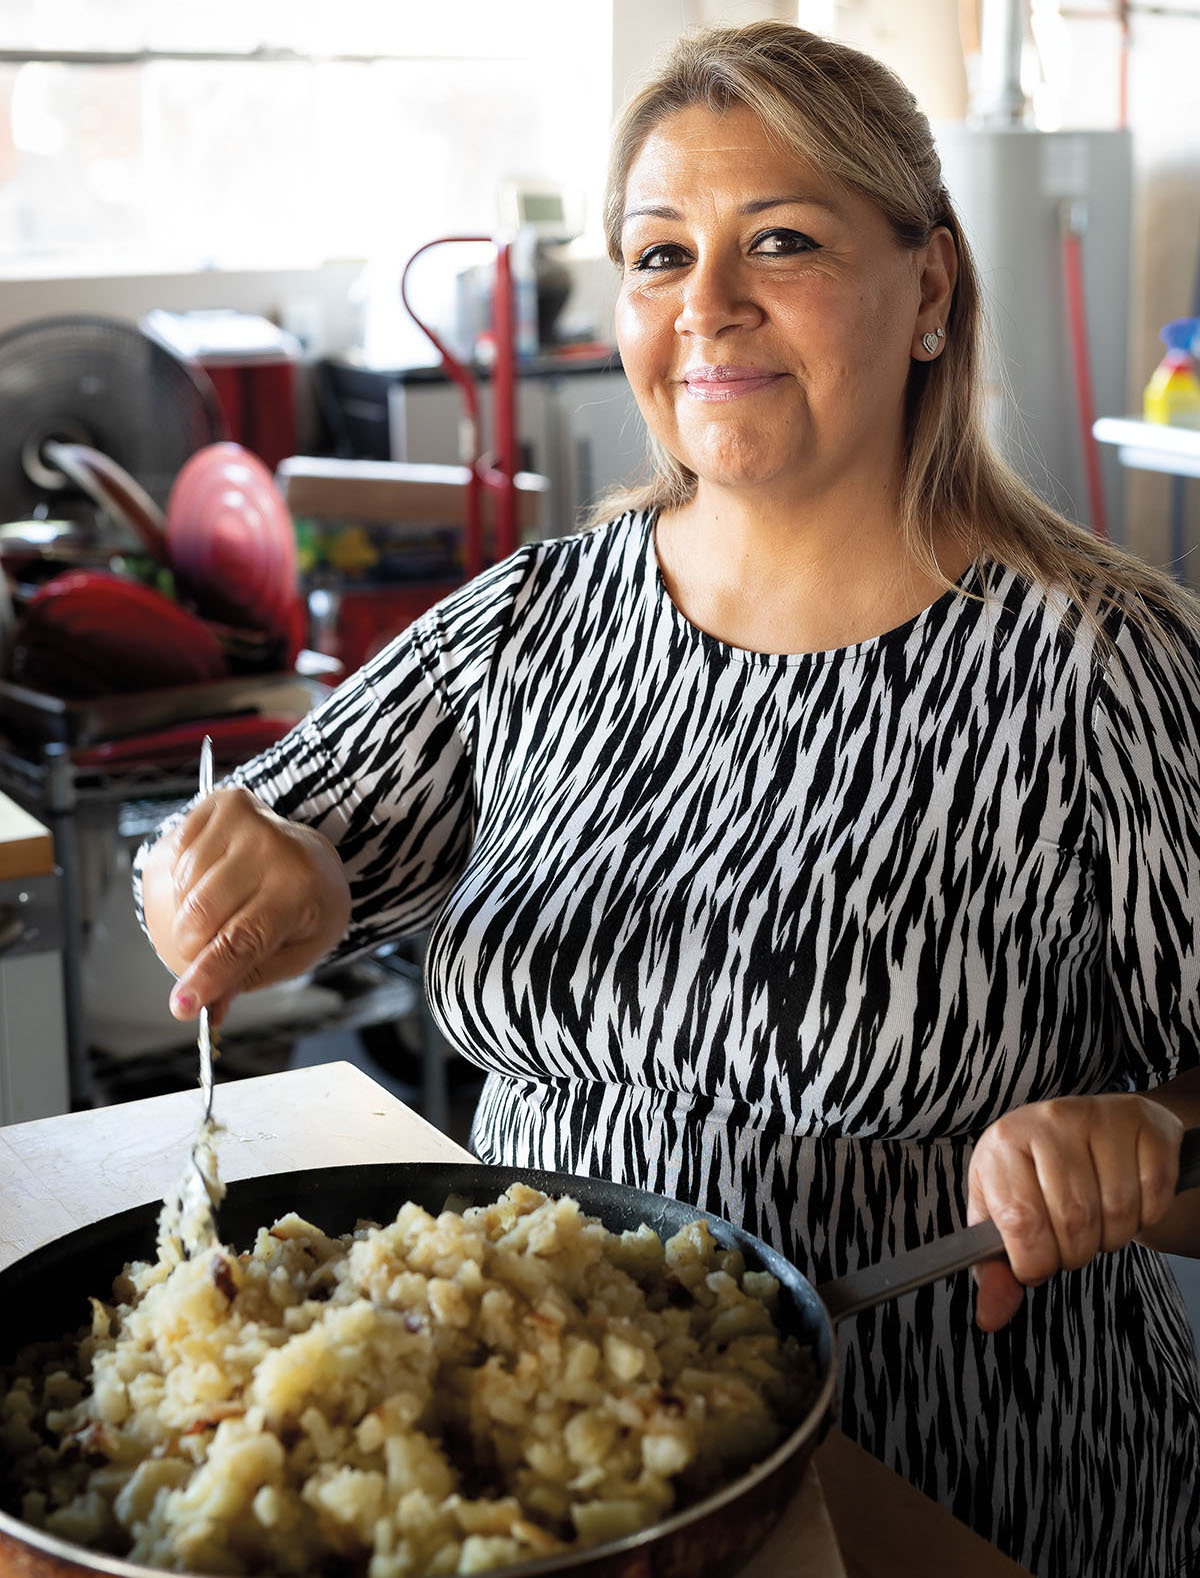 A woman in a black and white striped shirt stirs a large portion of food